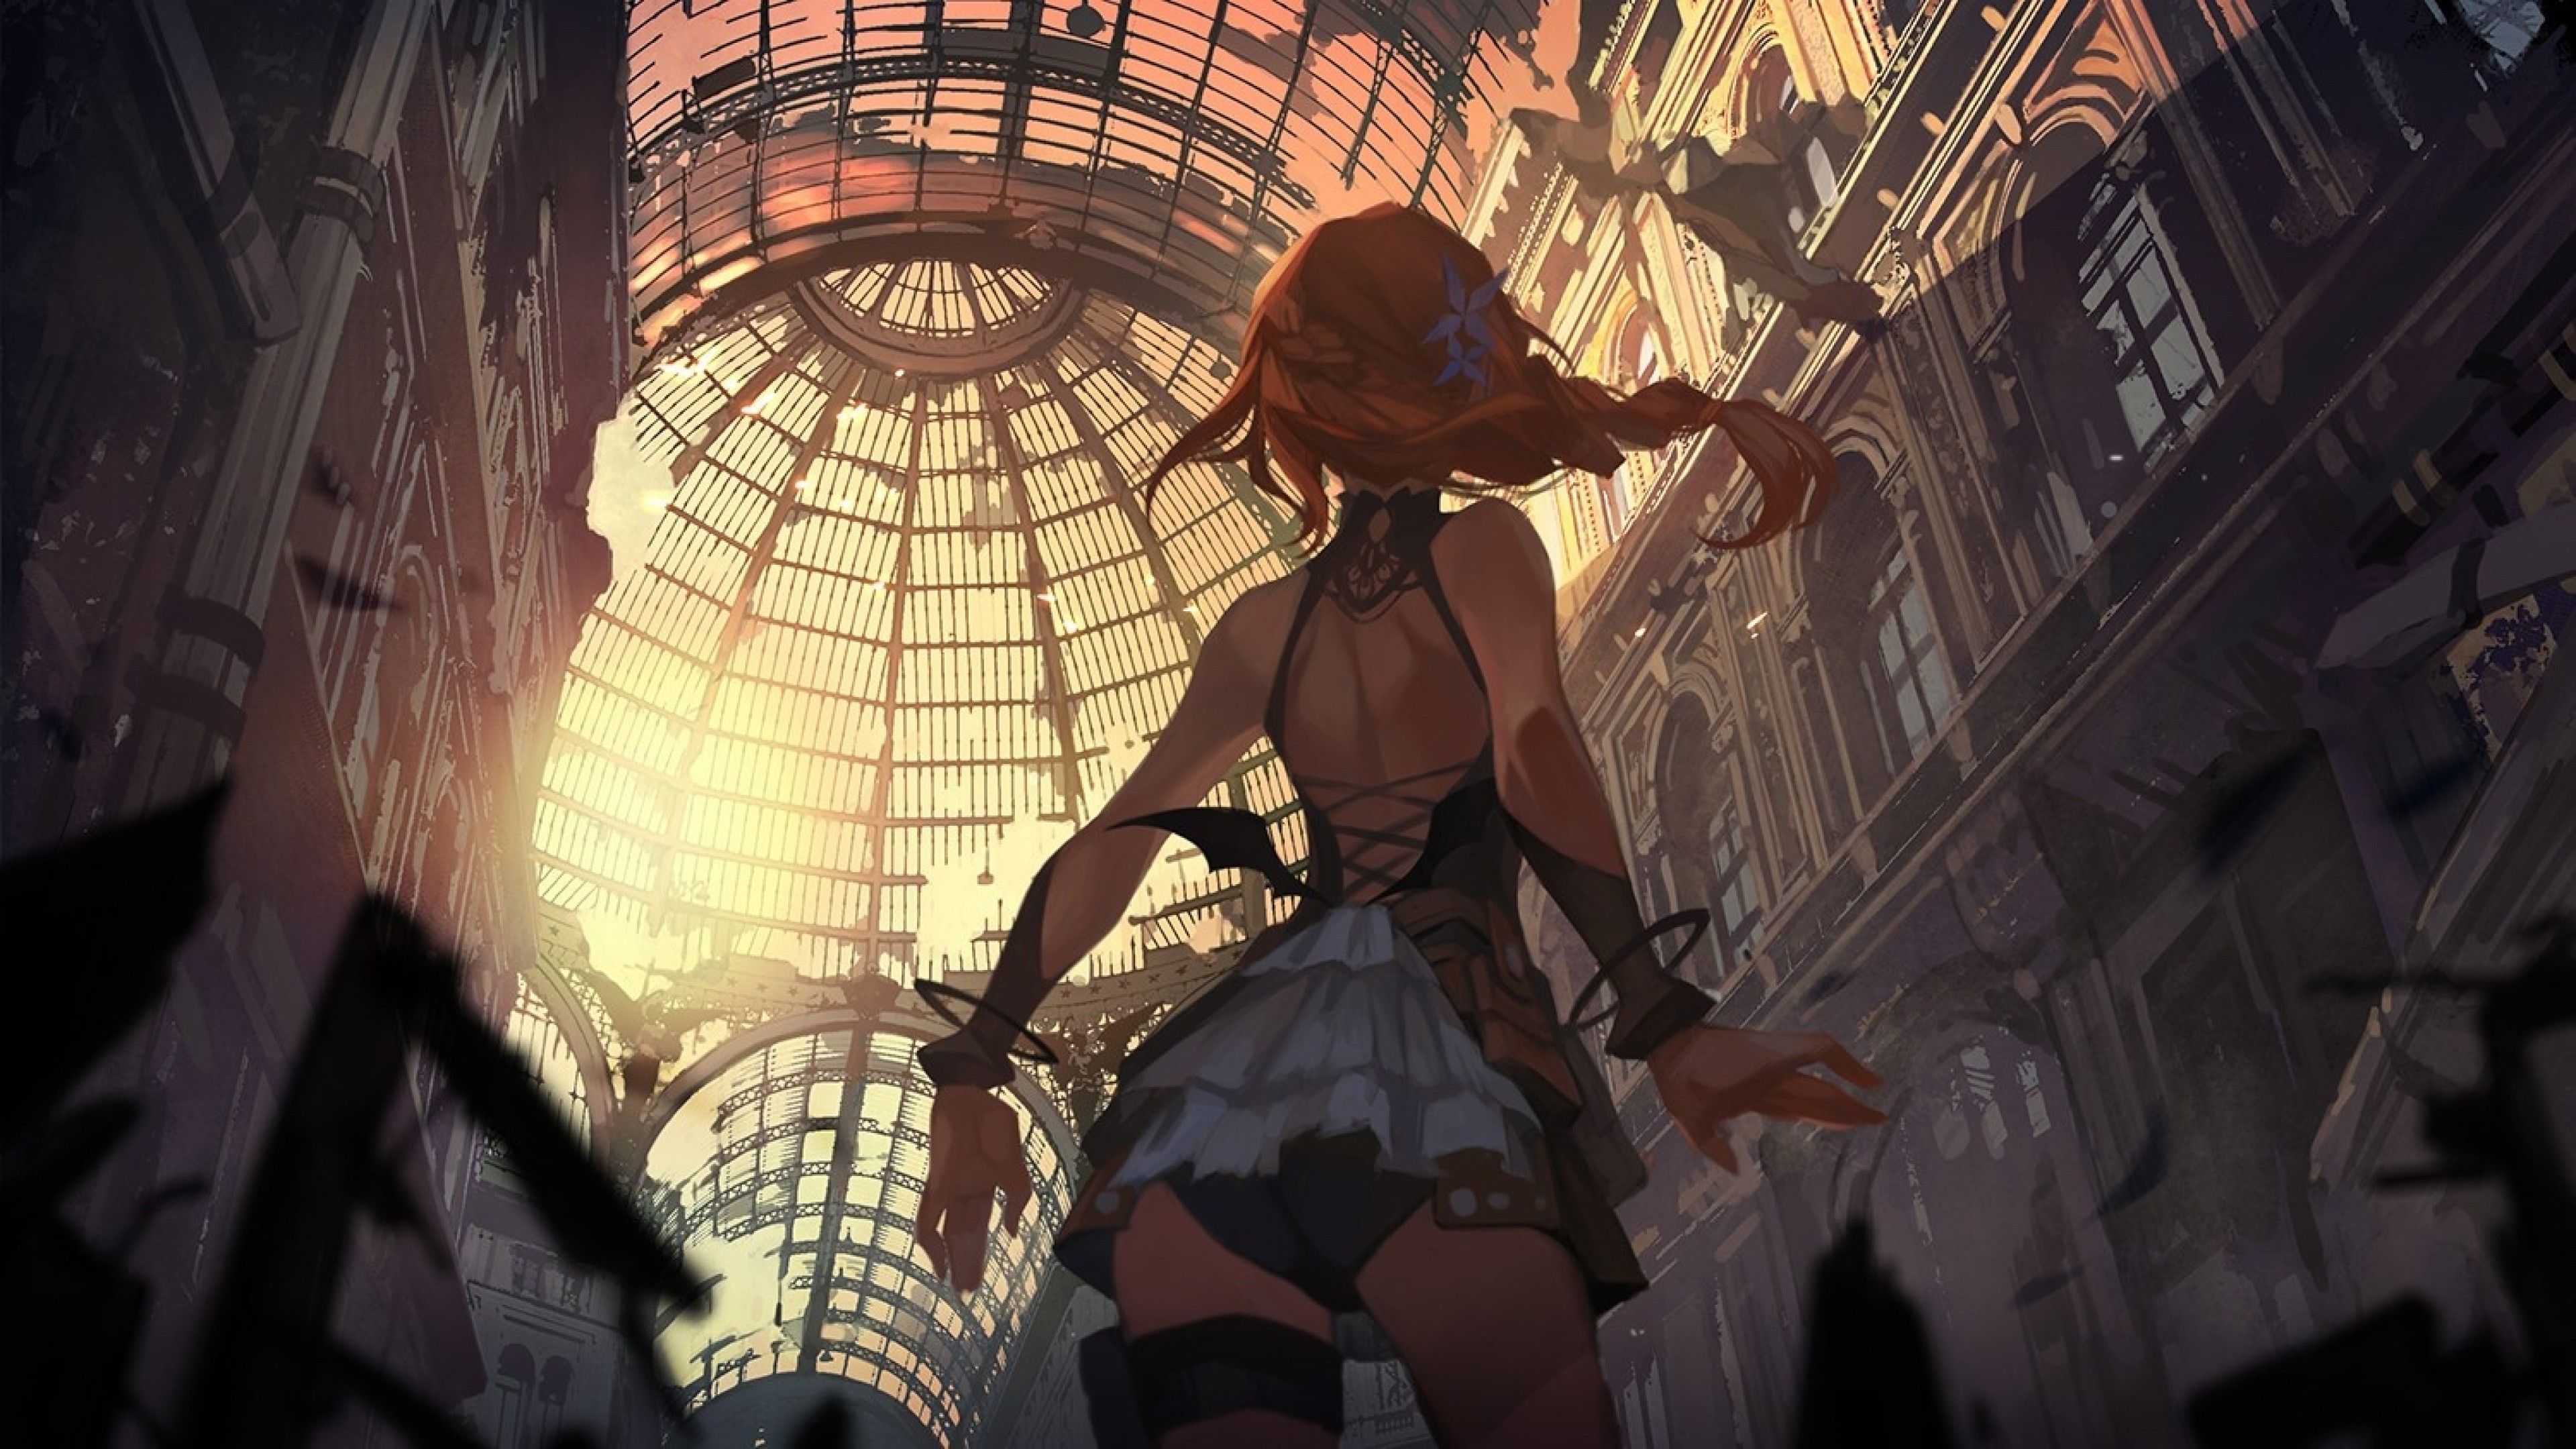 Download 3840x2160 Anime Girl, Under The Dome, Dress Wallpaper